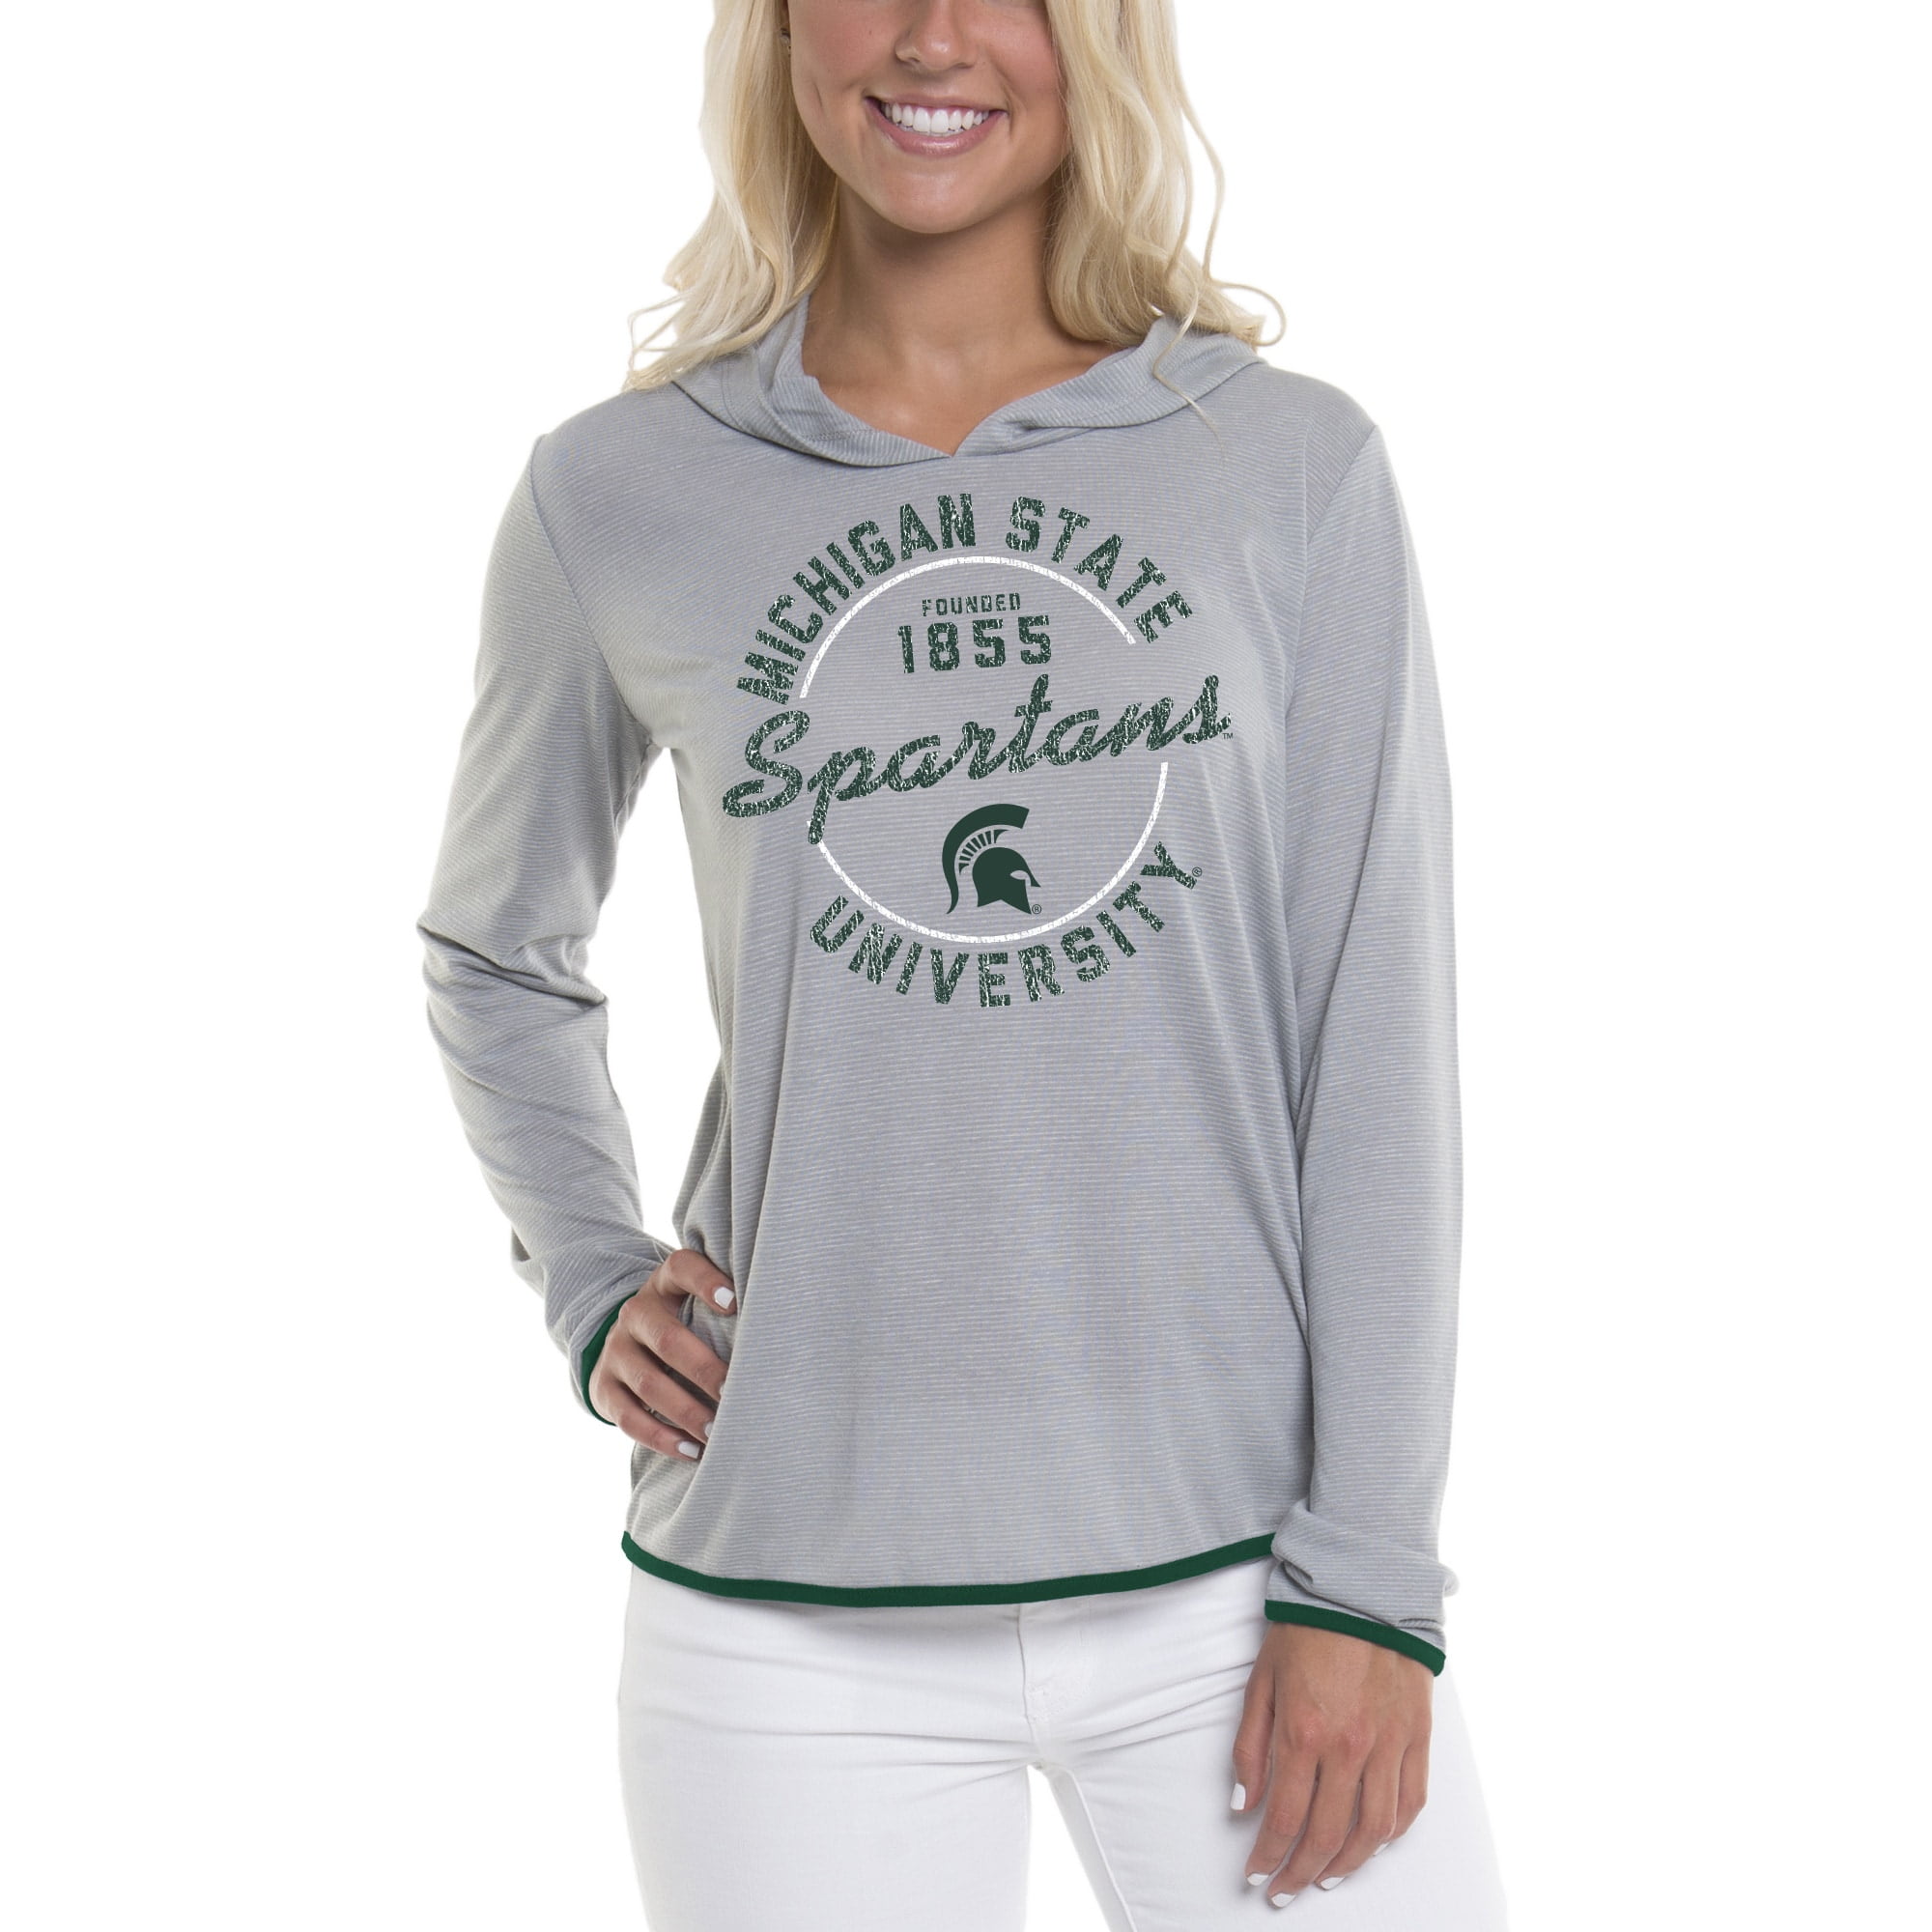 NCAA Womens Michigan State Spartans Tunic Pullover Hoodie Gray, Large